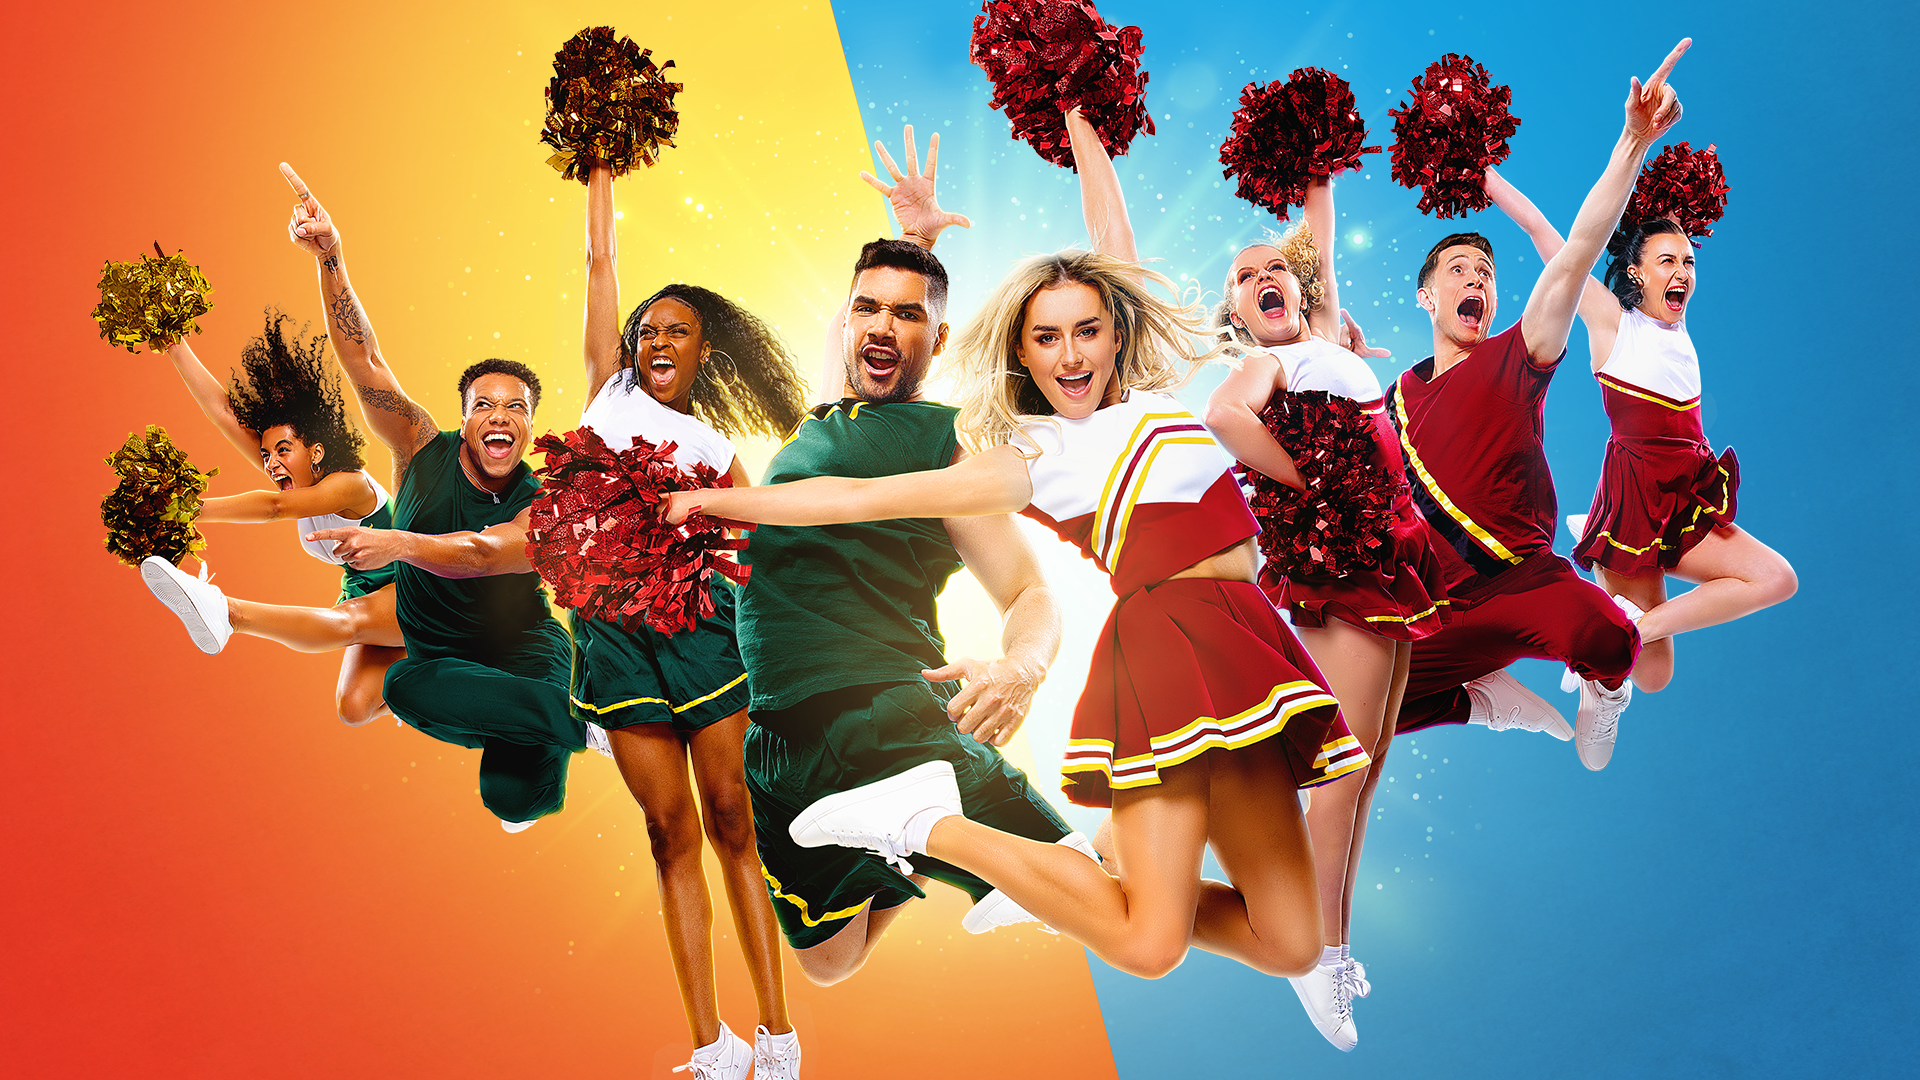 NEWS: Bring it On the Musical will play London season